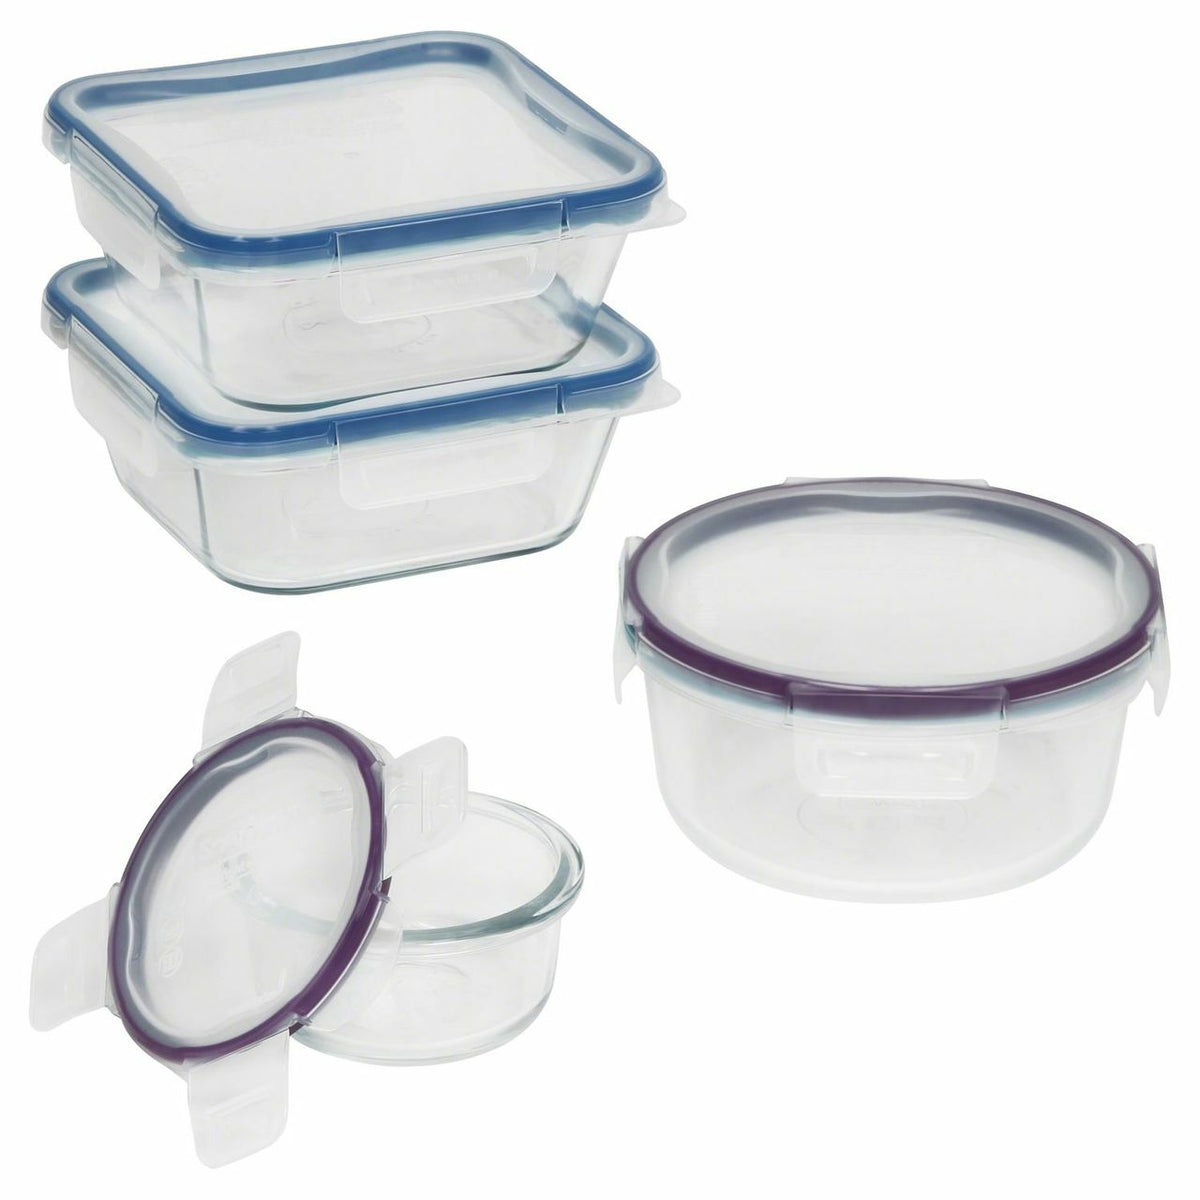 Snapware Total Solution Pyrex 4-cup Covered Round Container